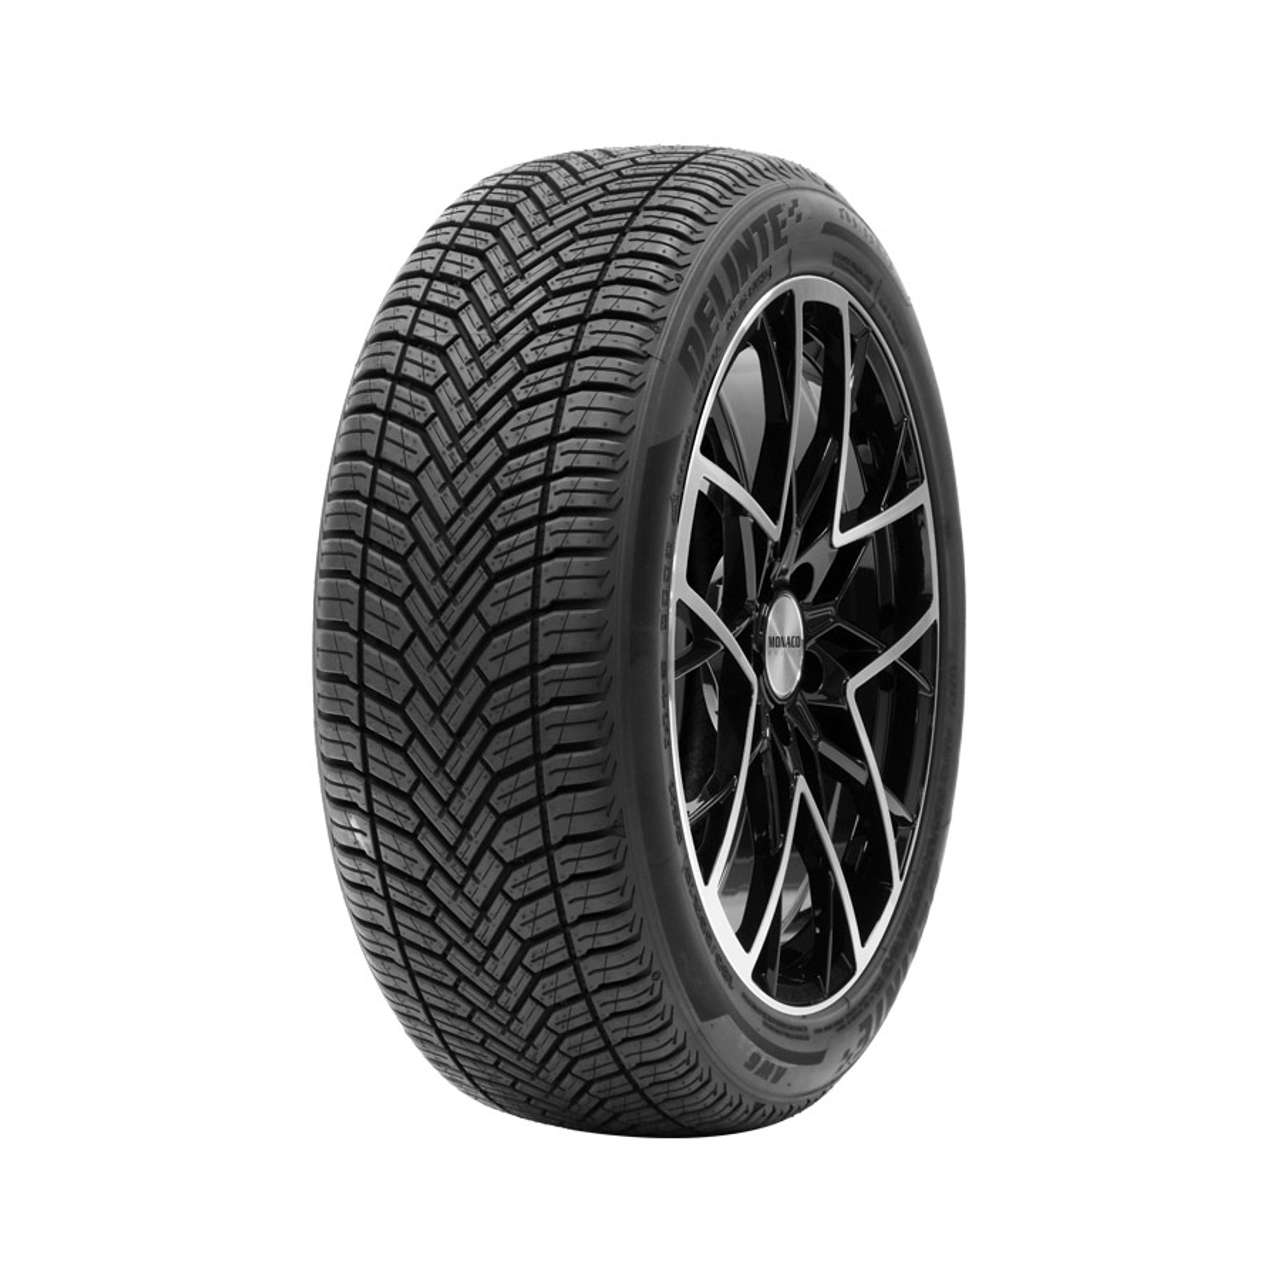 DELINTE AW6 185/65R15 88H BSW